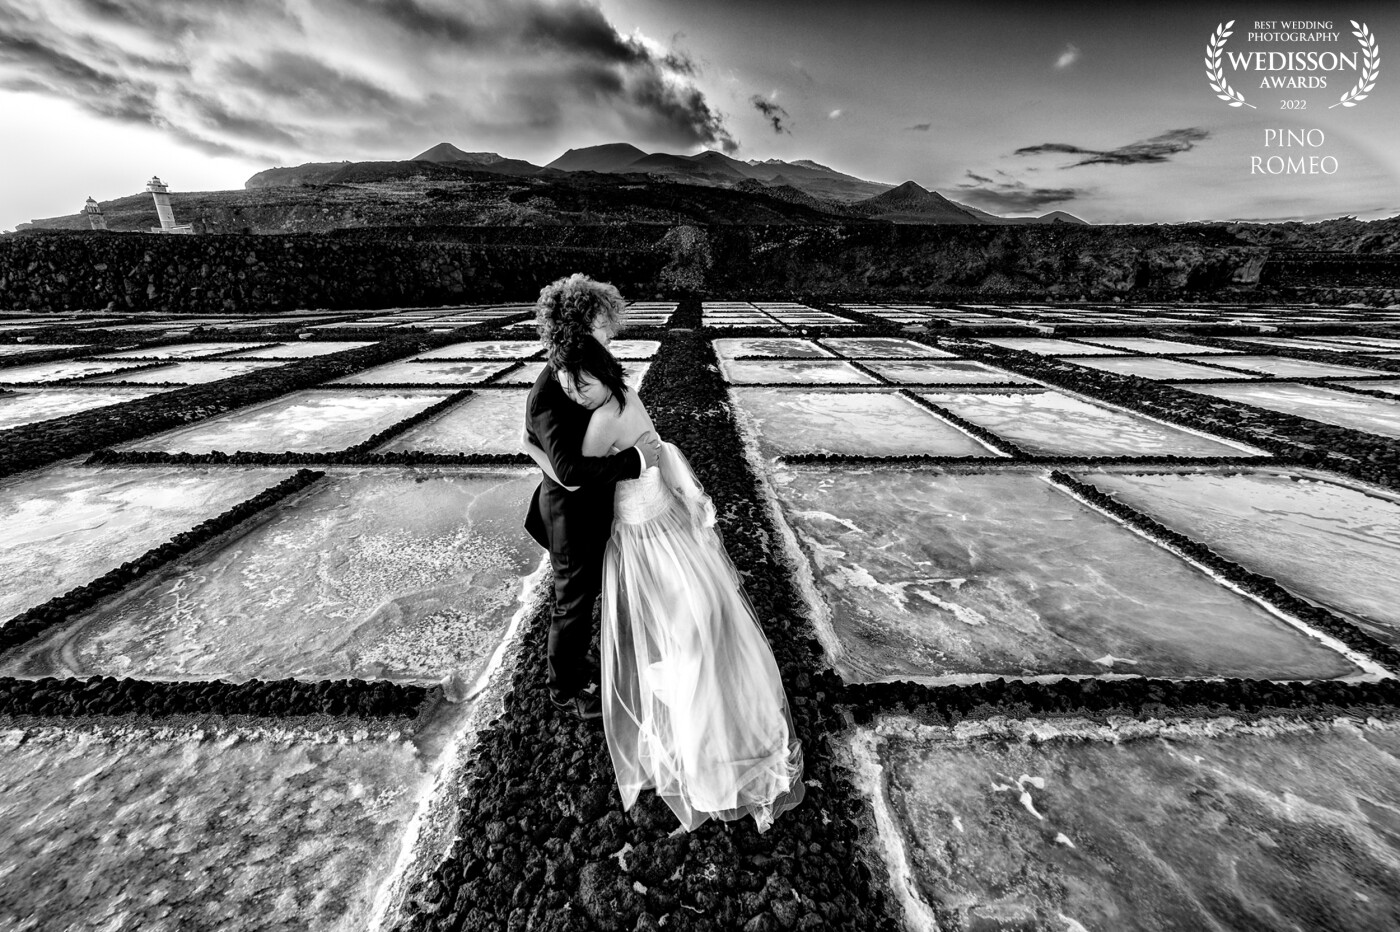 It was a windy day on the southernmost part of the island of La Palma (Canarias). The sun was setting, and our newlyweds were dancing their love away in the salt pans of (Salinas de) Fuencaliente. An ideal setting for an After Wedding session.